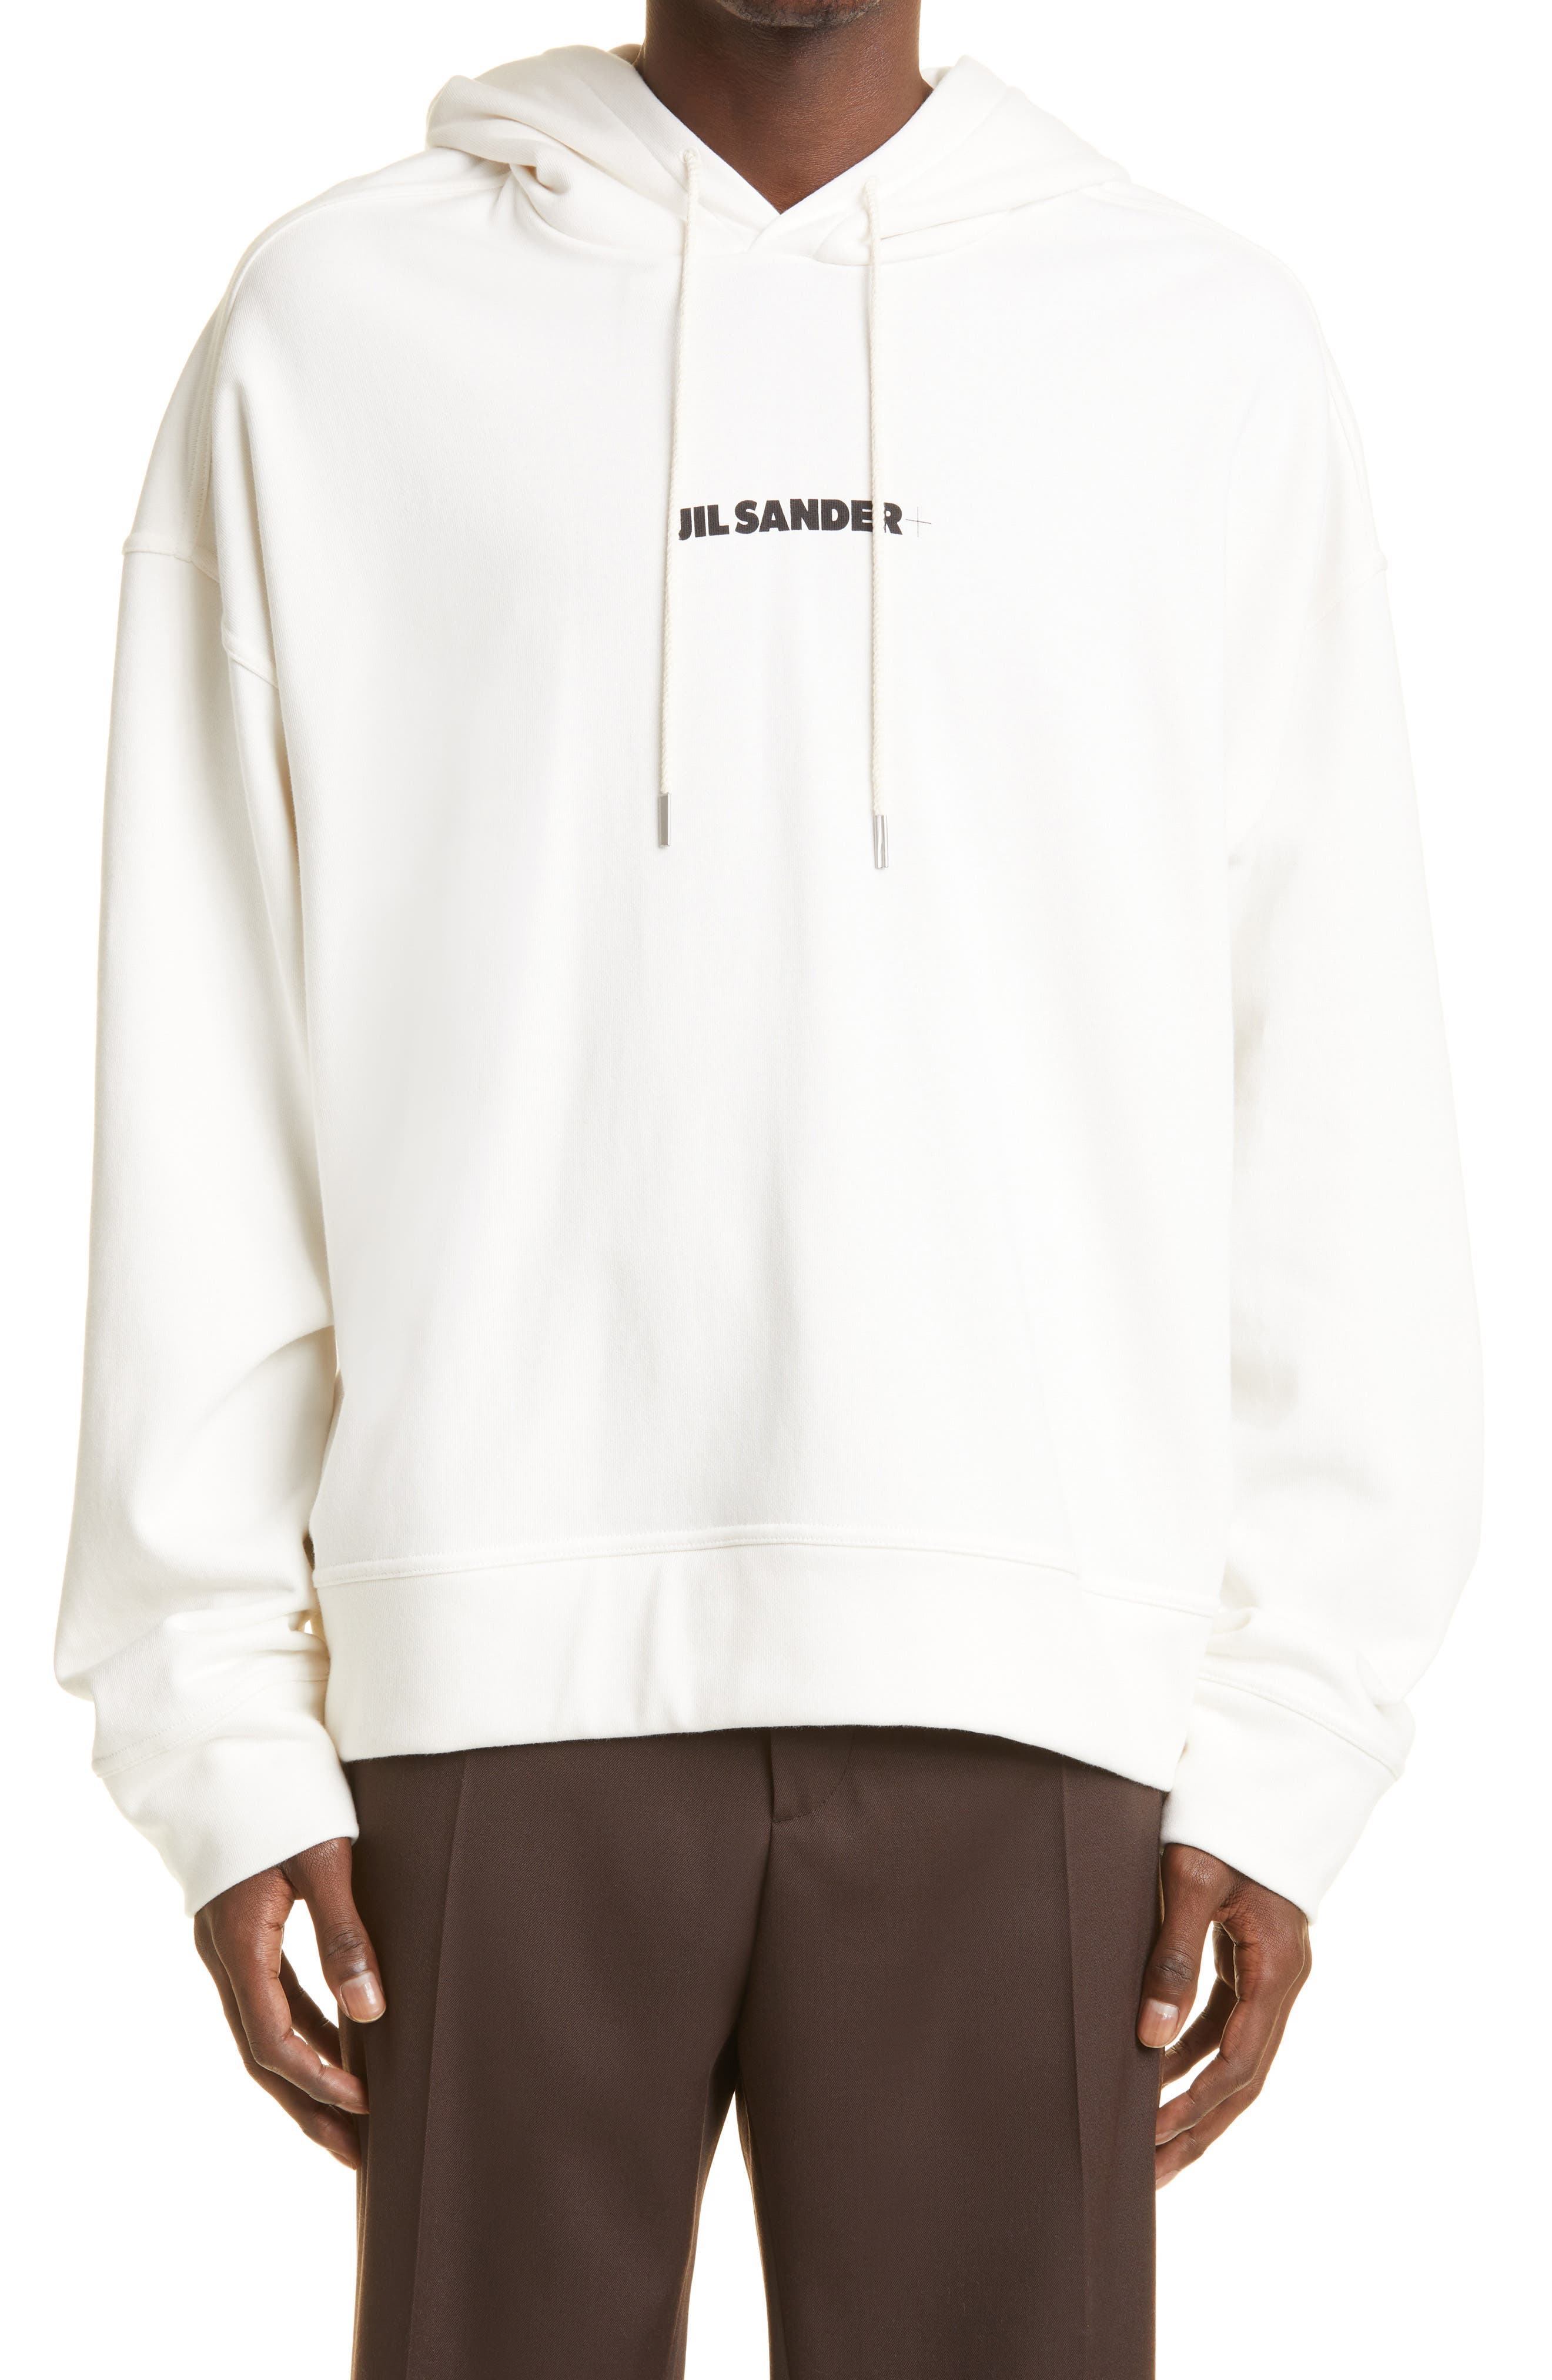 Jil Sander Men's Logo Graphic Hoodie in Natural at Nordstrom, Size Small